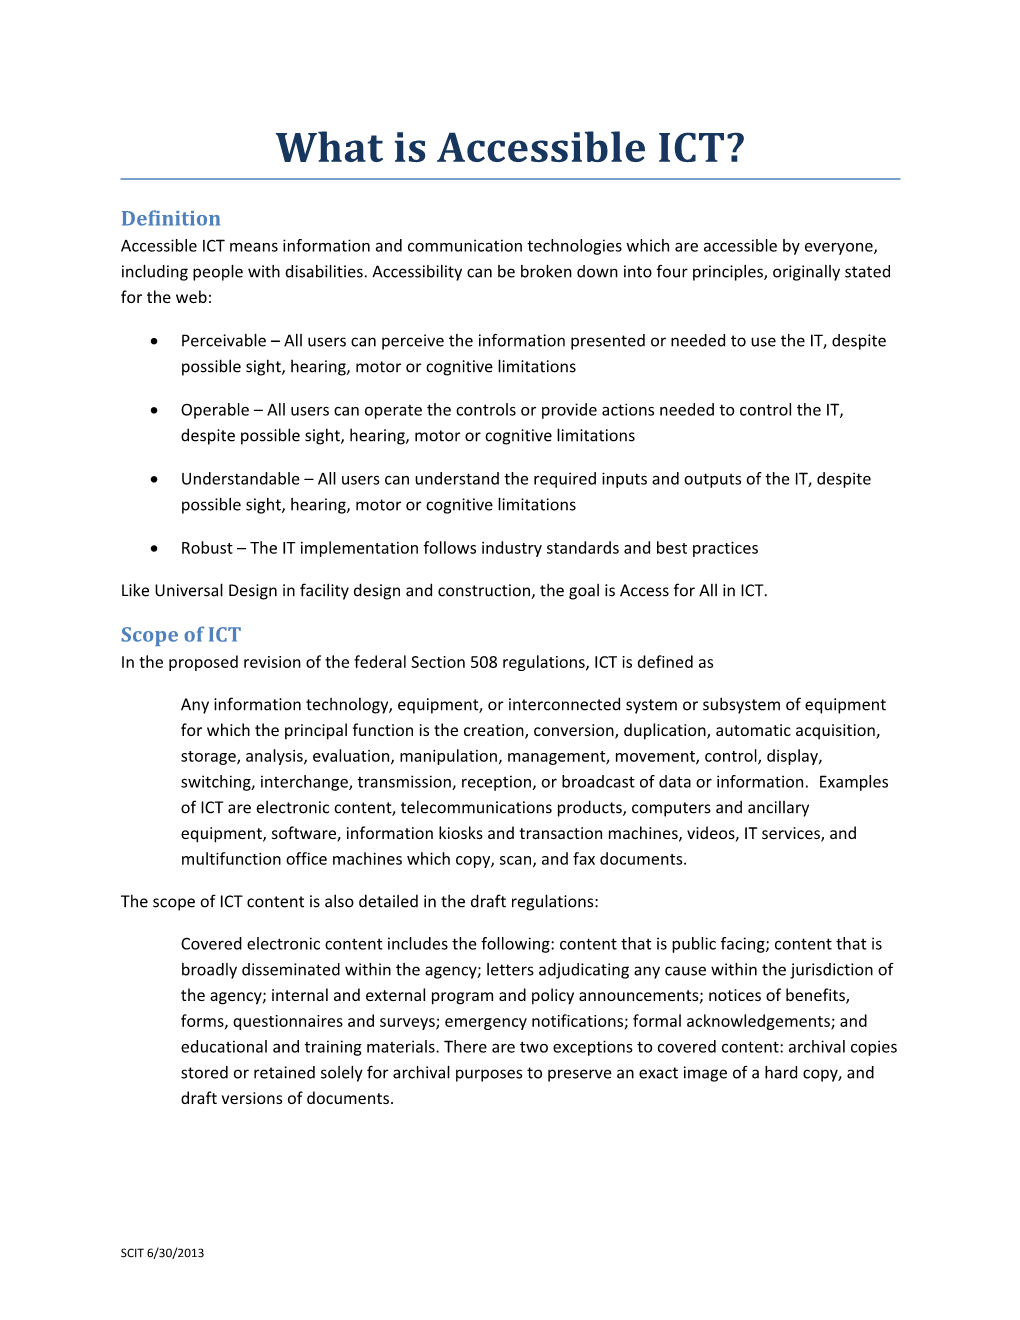 What Is Accessible ICT?